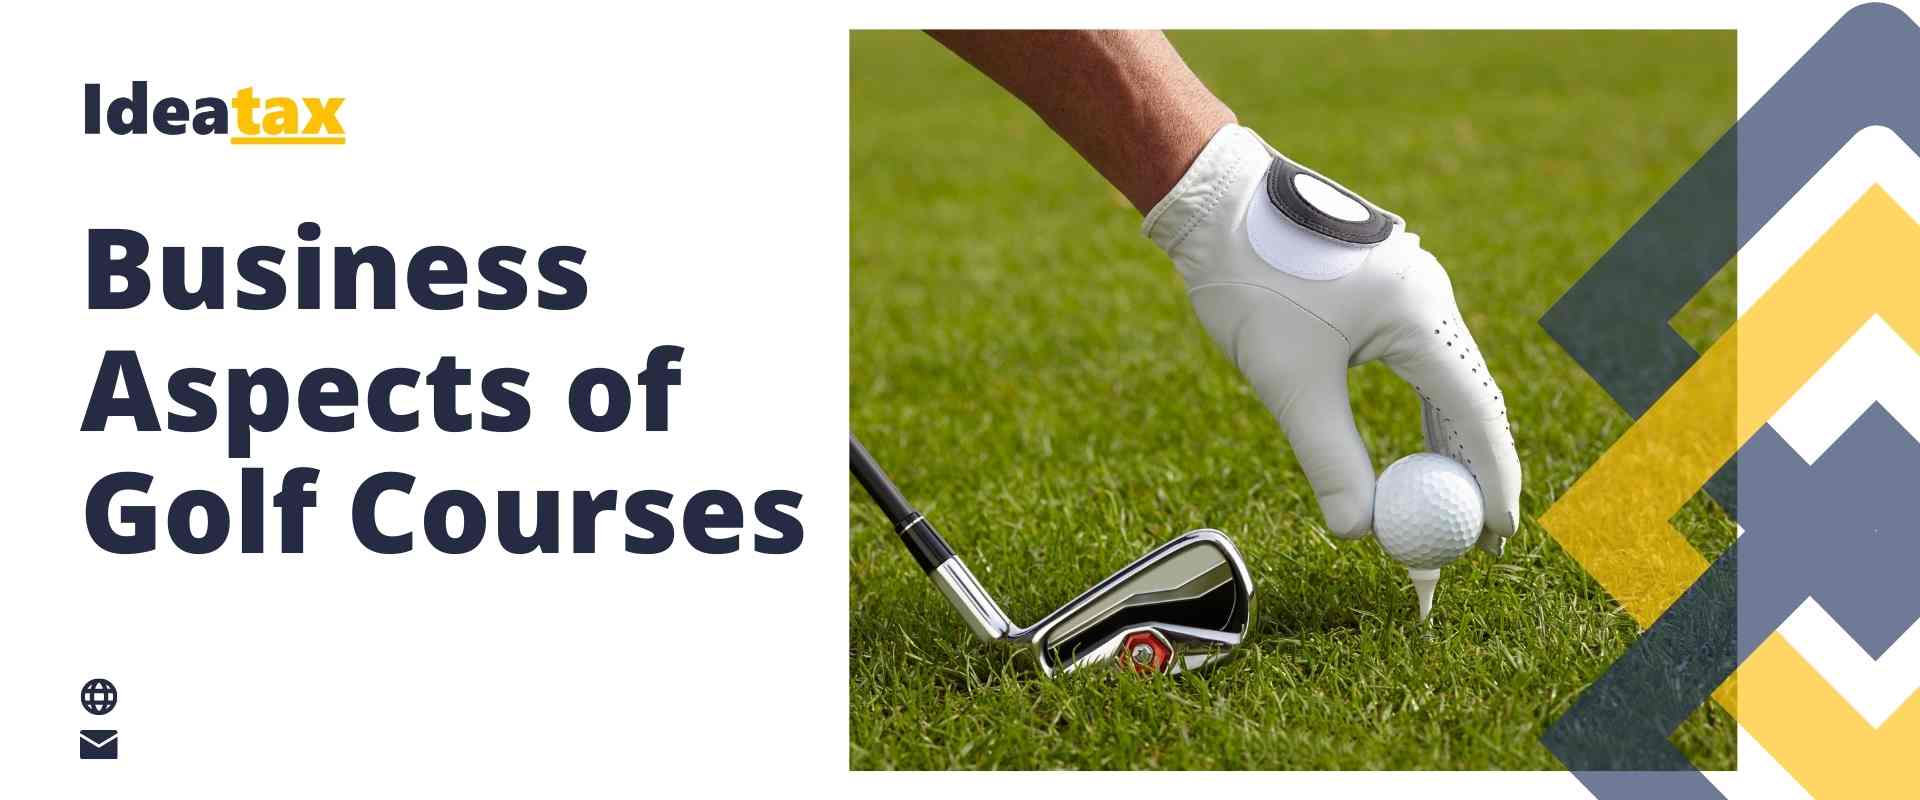 Business Aspects of Golf Courses